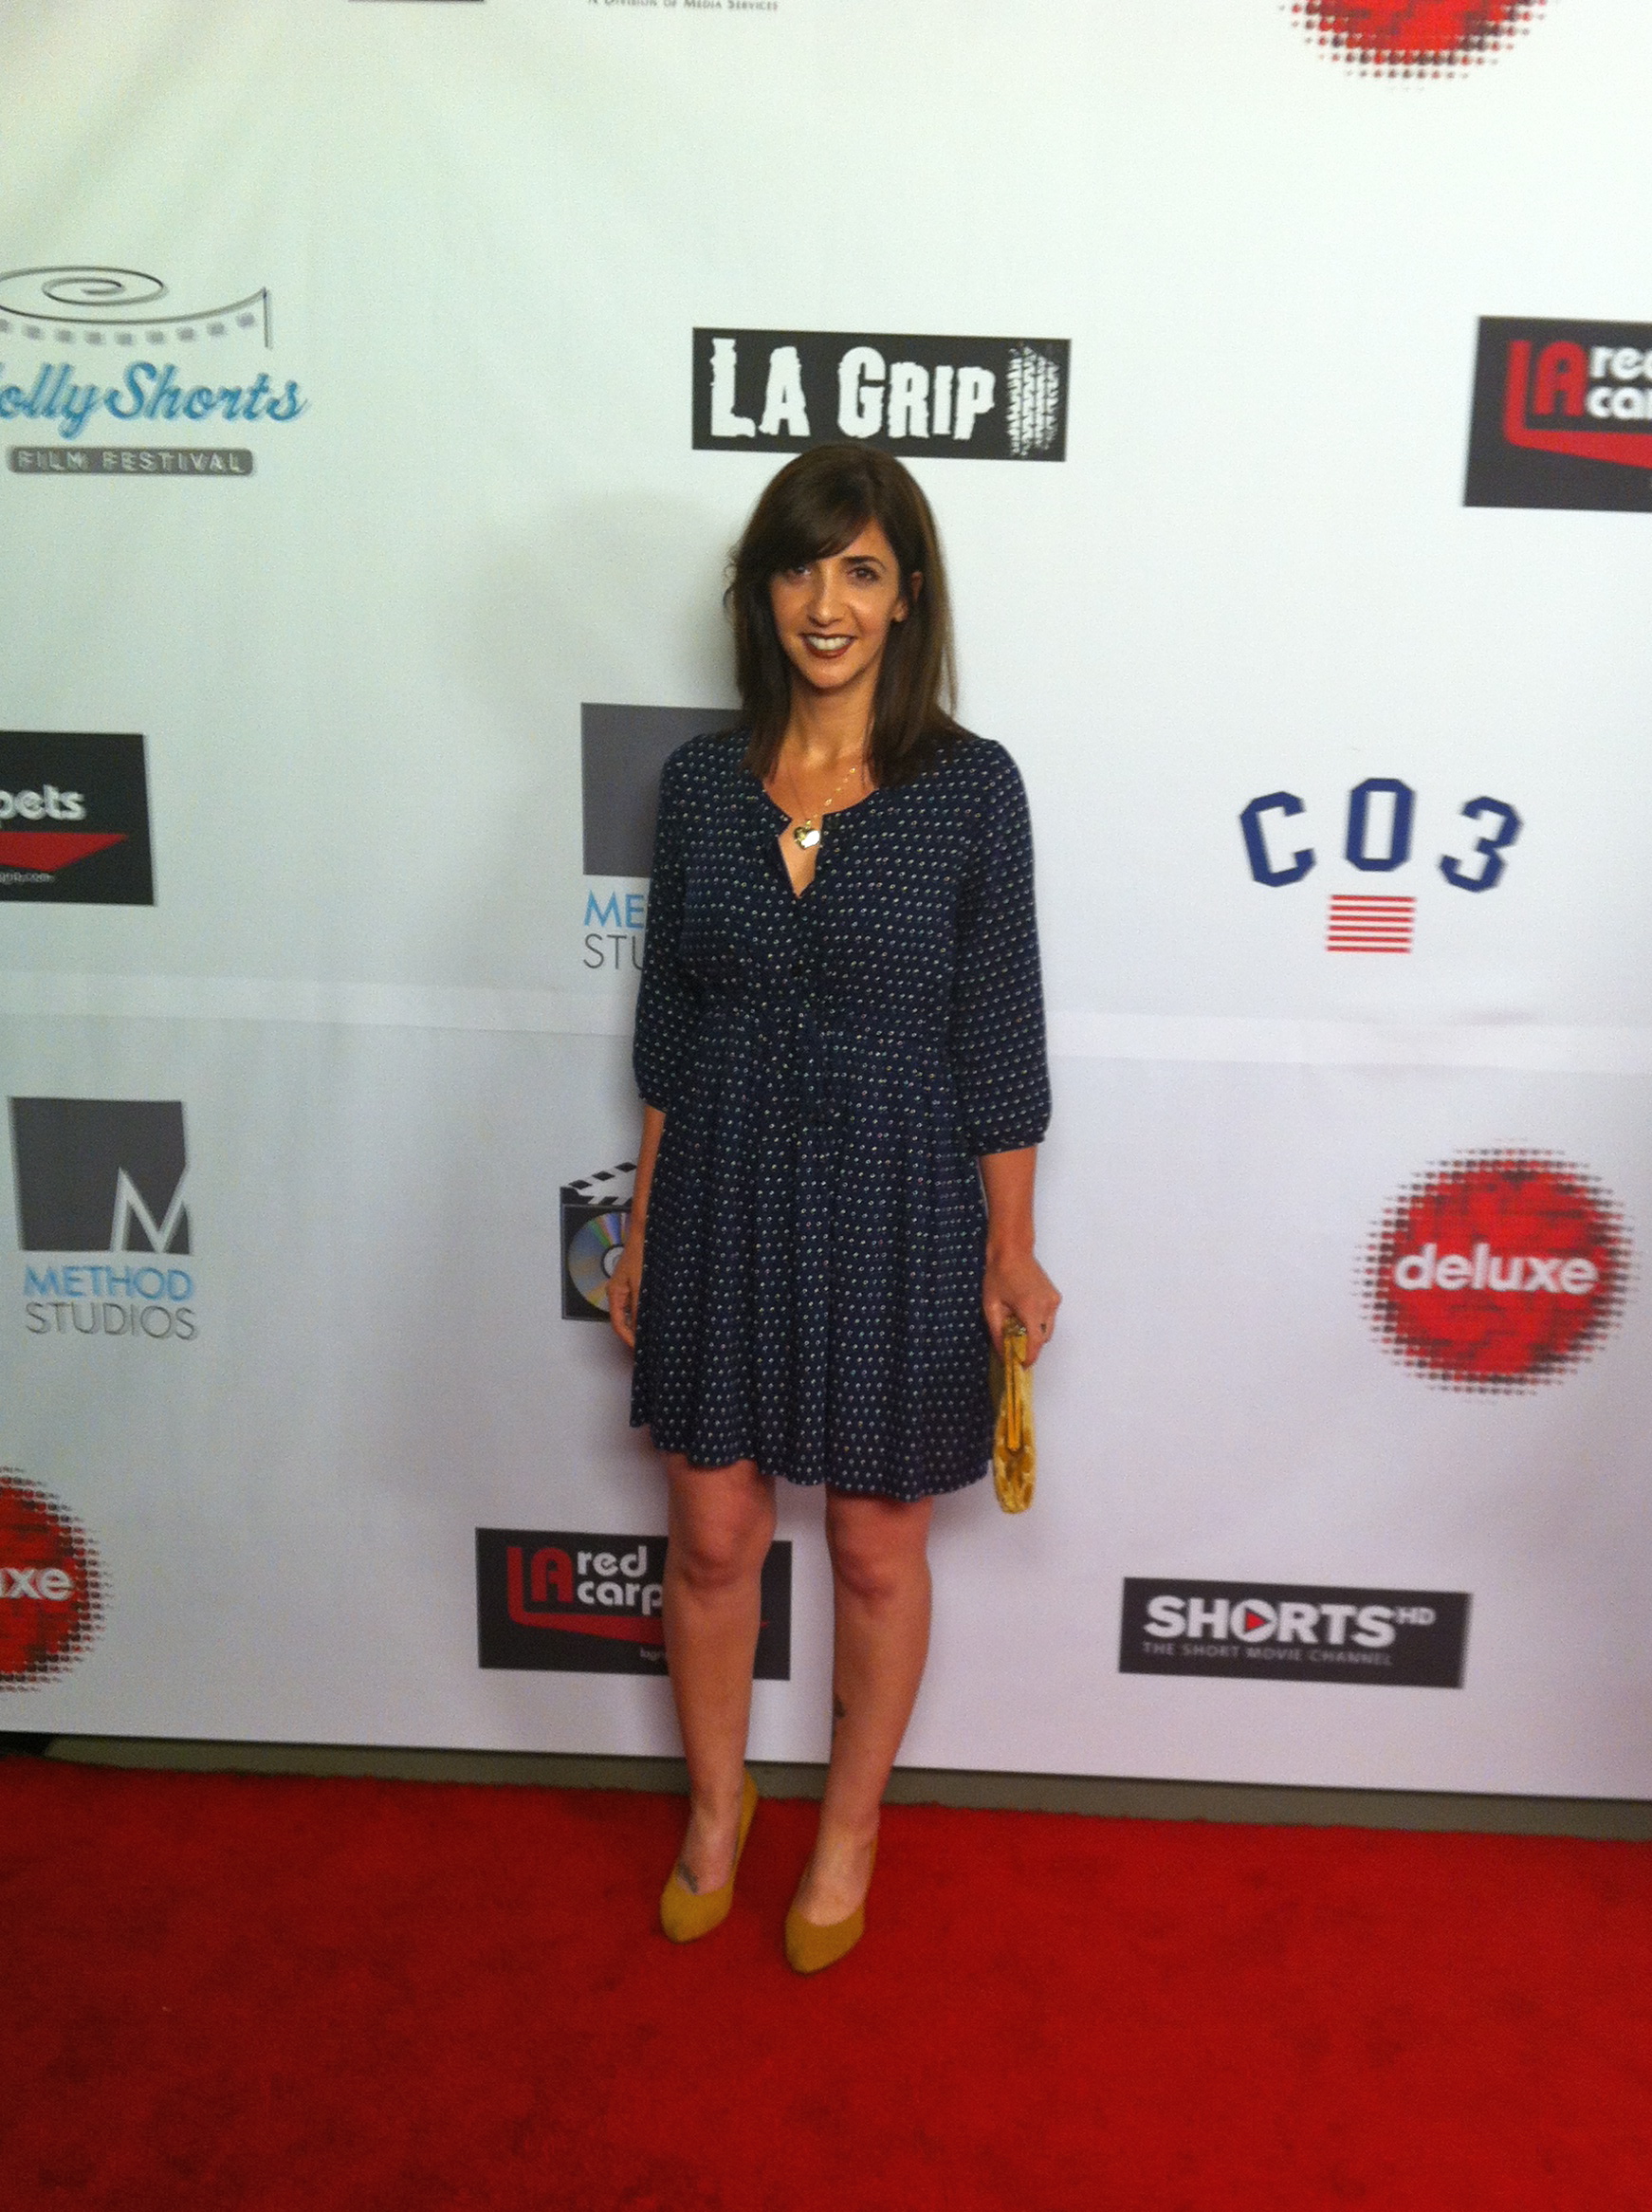 Suzanne Cotsakos at the Holly Shorts Film Festival (2012)